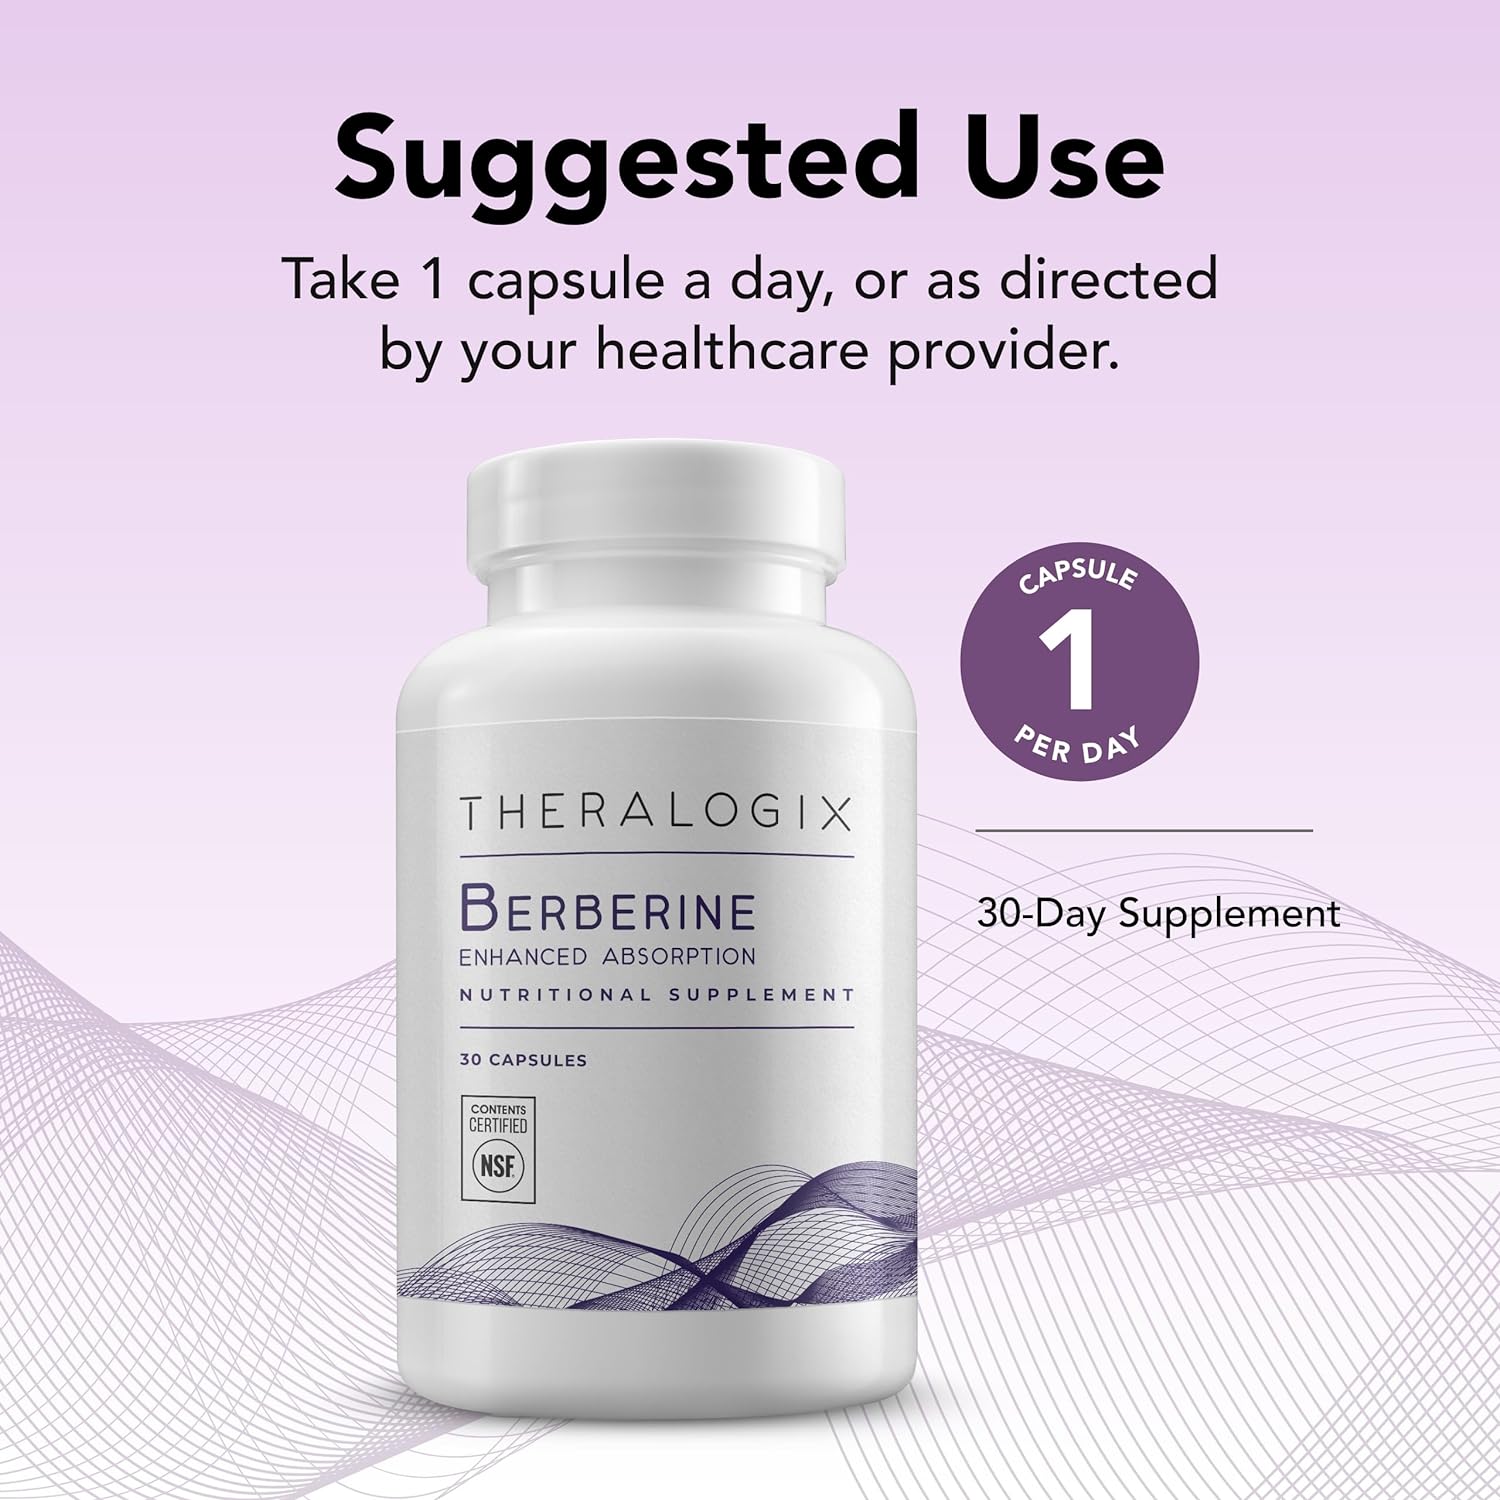 Theralogix Berberine Enhanced Absorption - 30-Day Supply - Made with Berberine Phytosome to Help Support Healthy Metabolism & Hormone Balance* - NSF Certified - 30 Capsules : Health & Household